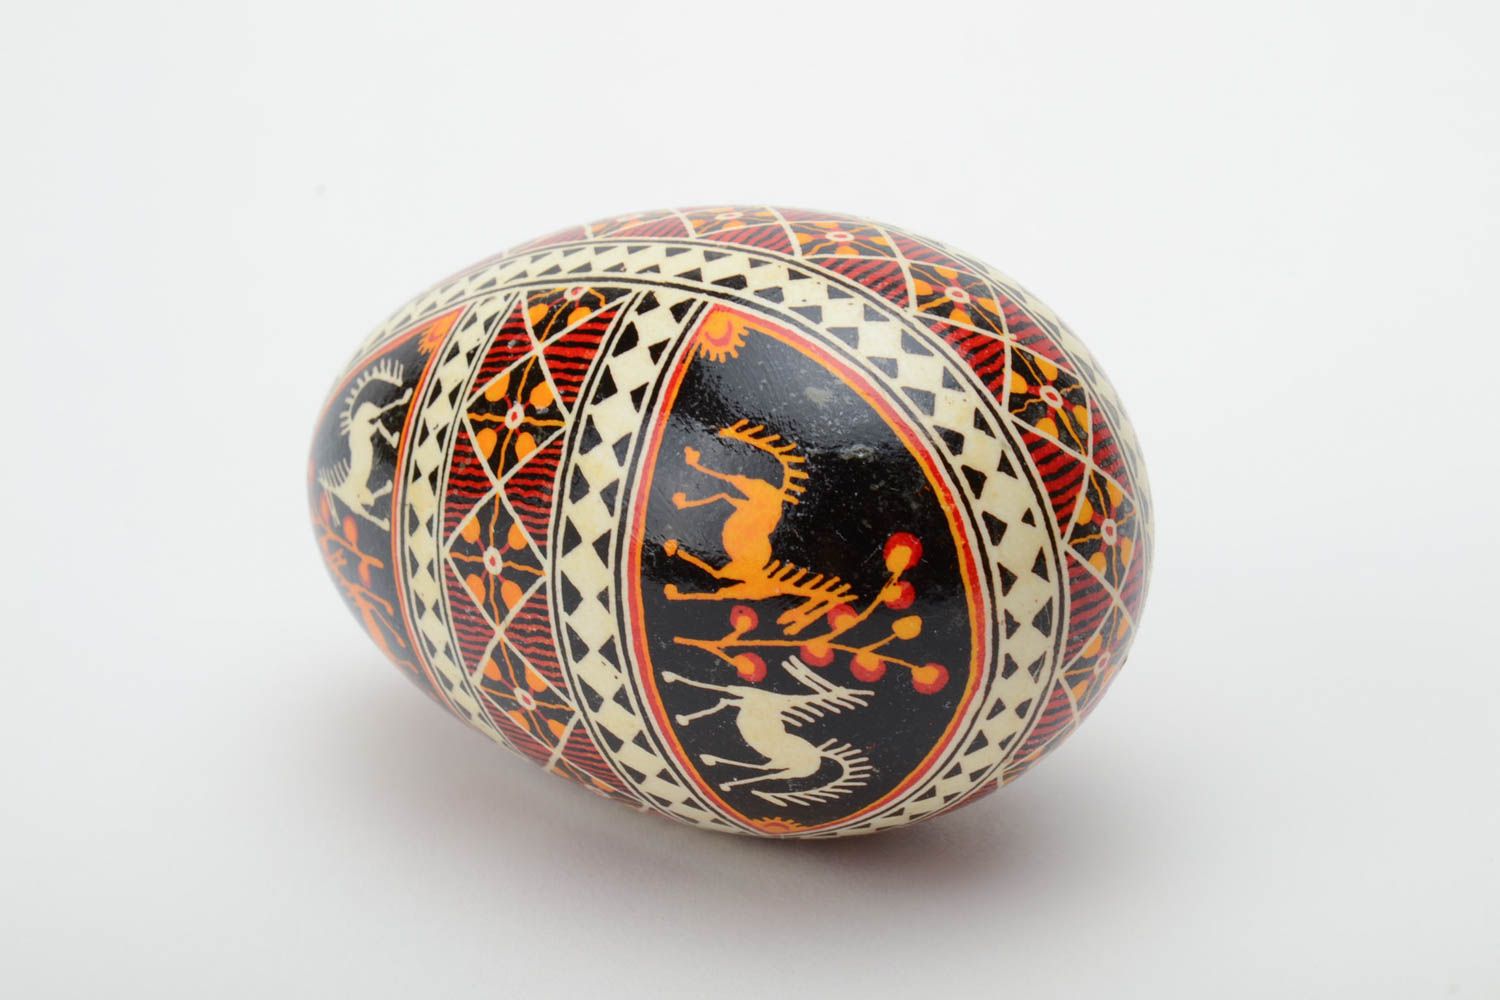 Handmade decorative art painted Easter egg traditional pysanka with horses image photo 4